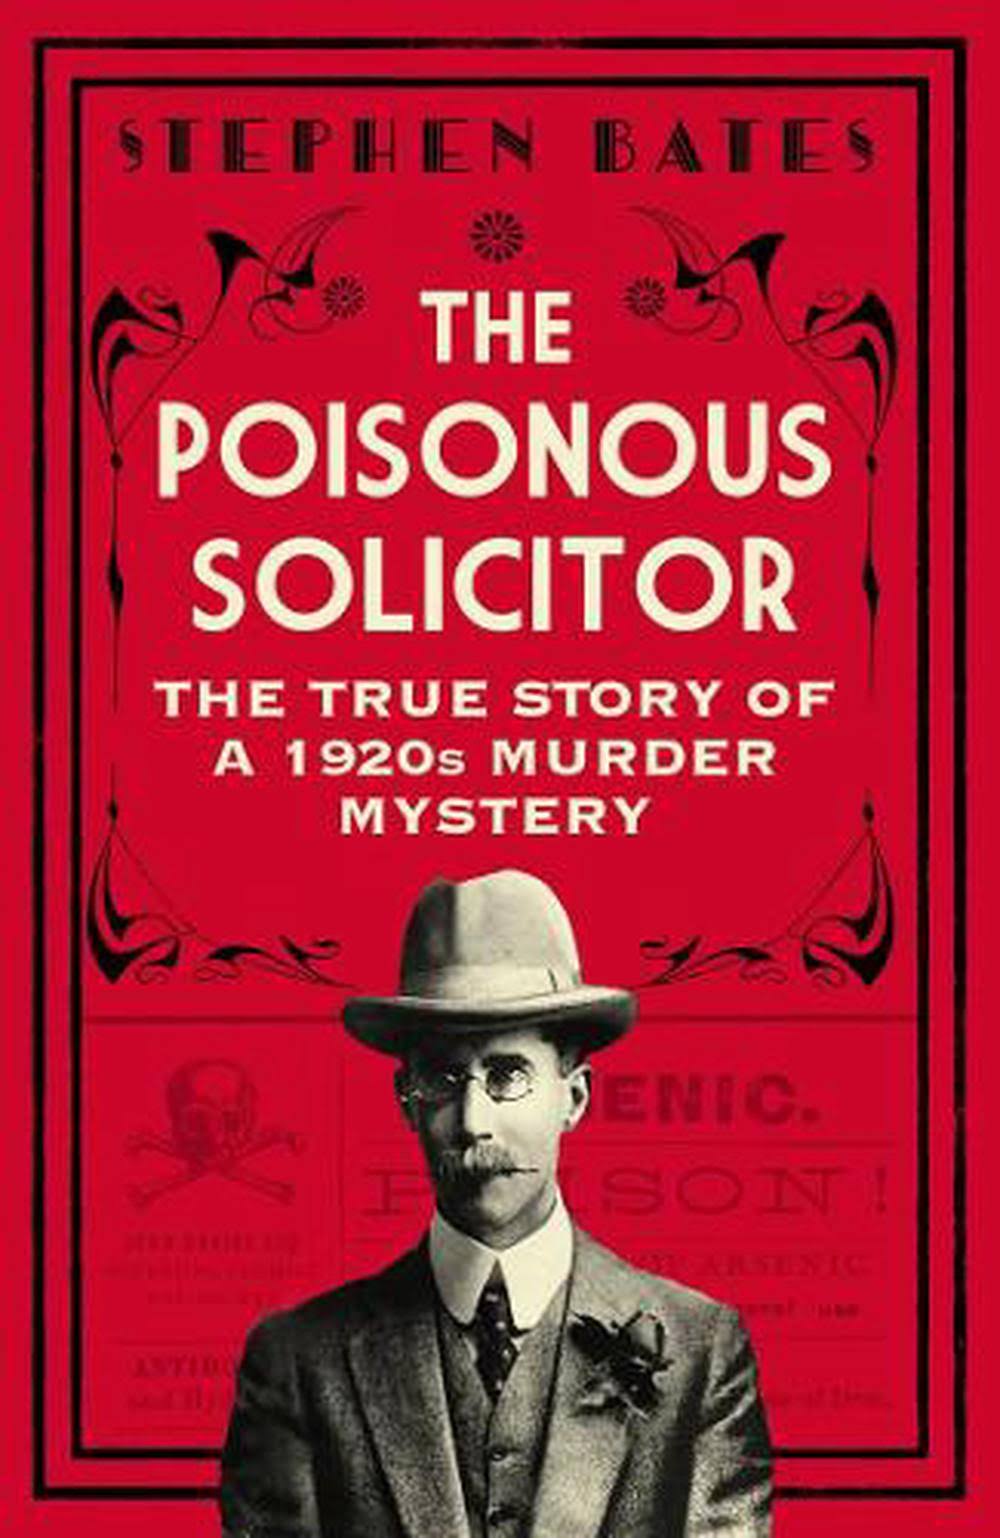 The Poisonous Solicitor by Stephen Bates